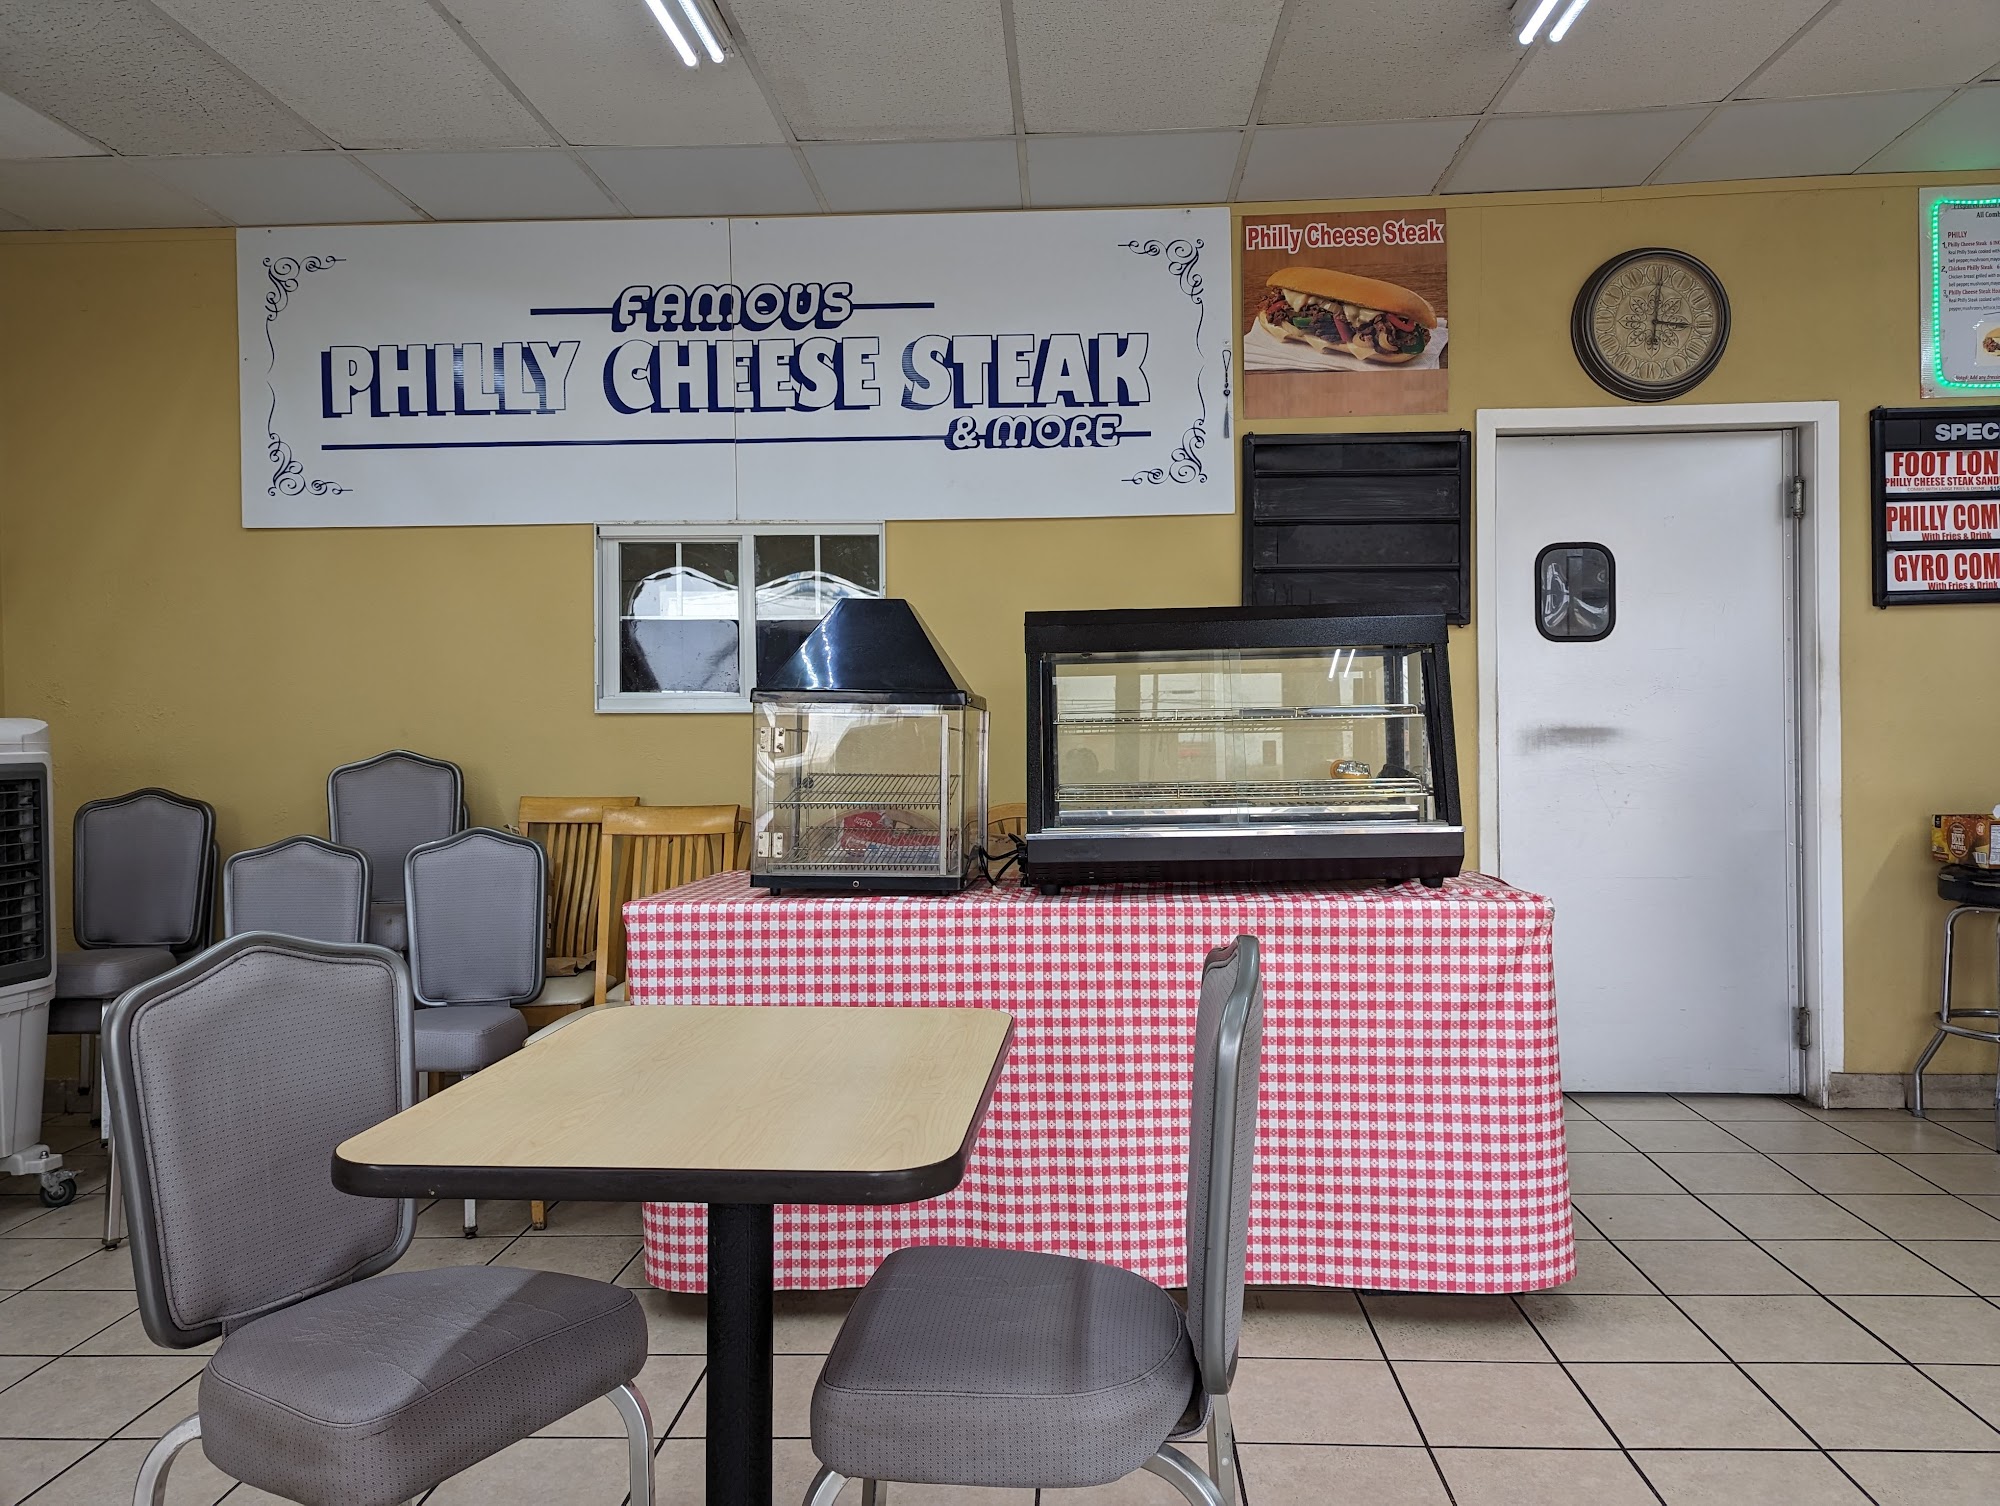 Famous Philly Cheese Steak & More